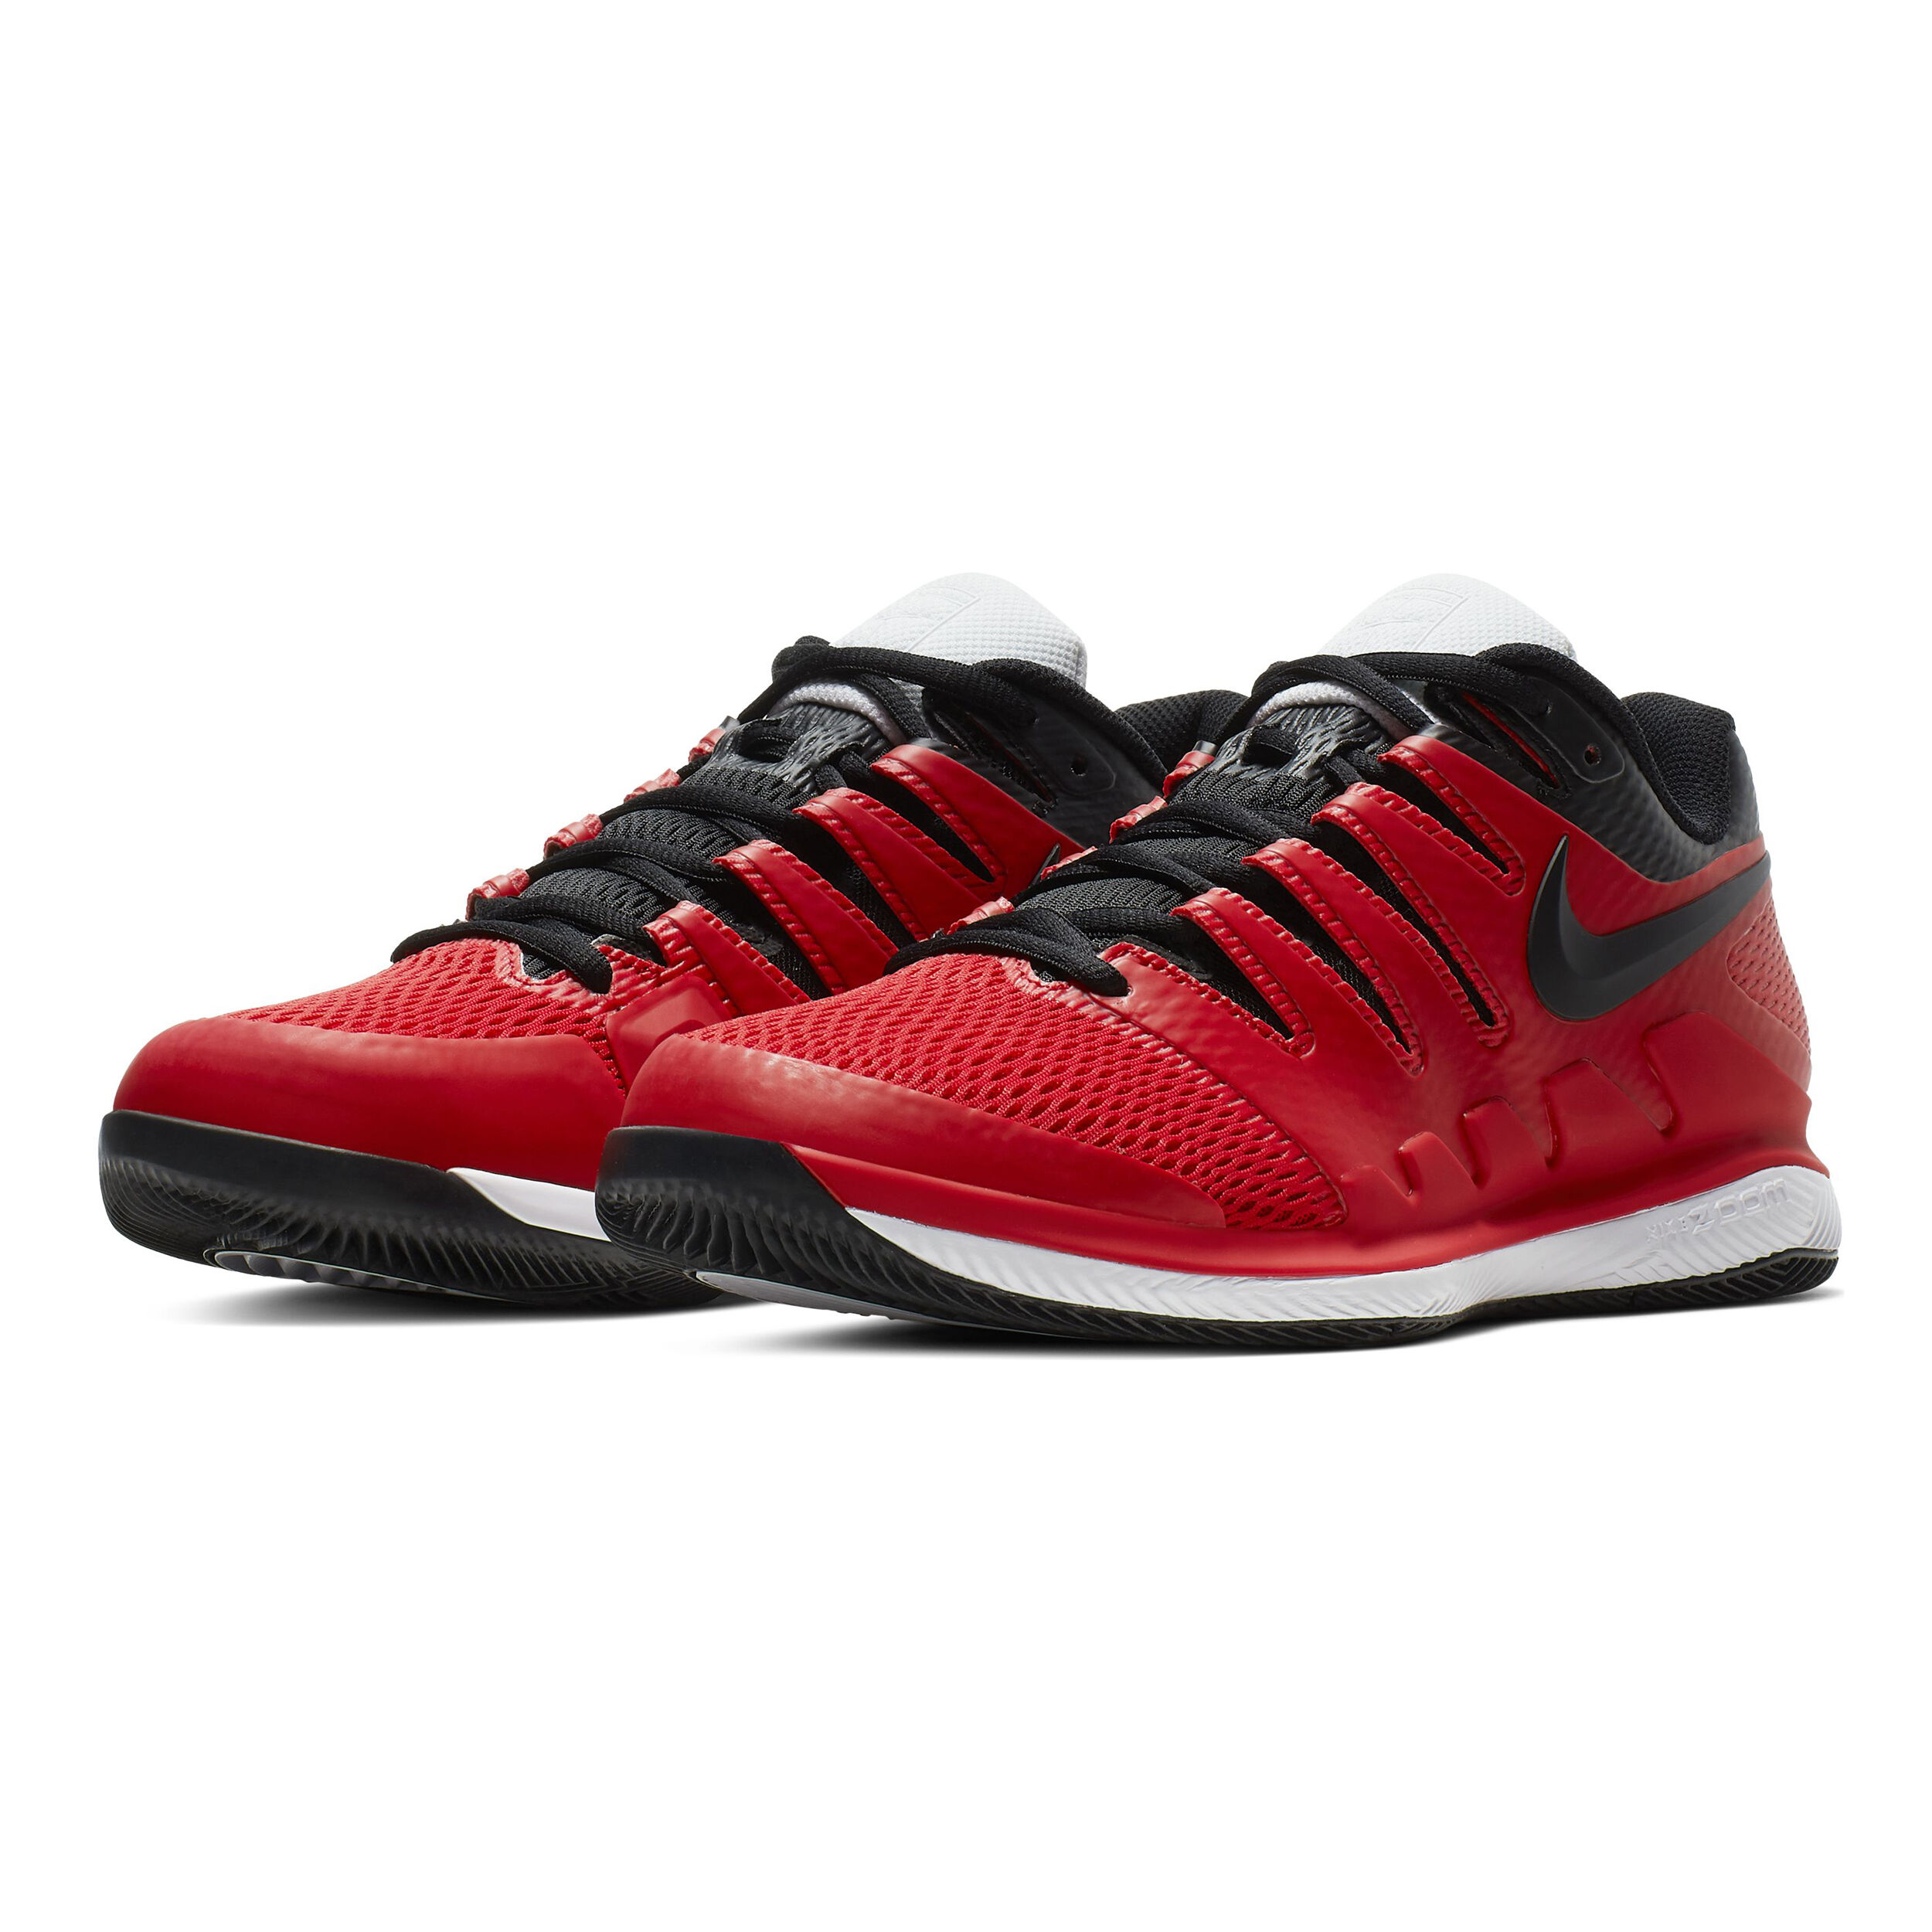 Nike Air Zoom Vapor X Chaussures Toutes Surfaces Hommes - Rouge ...